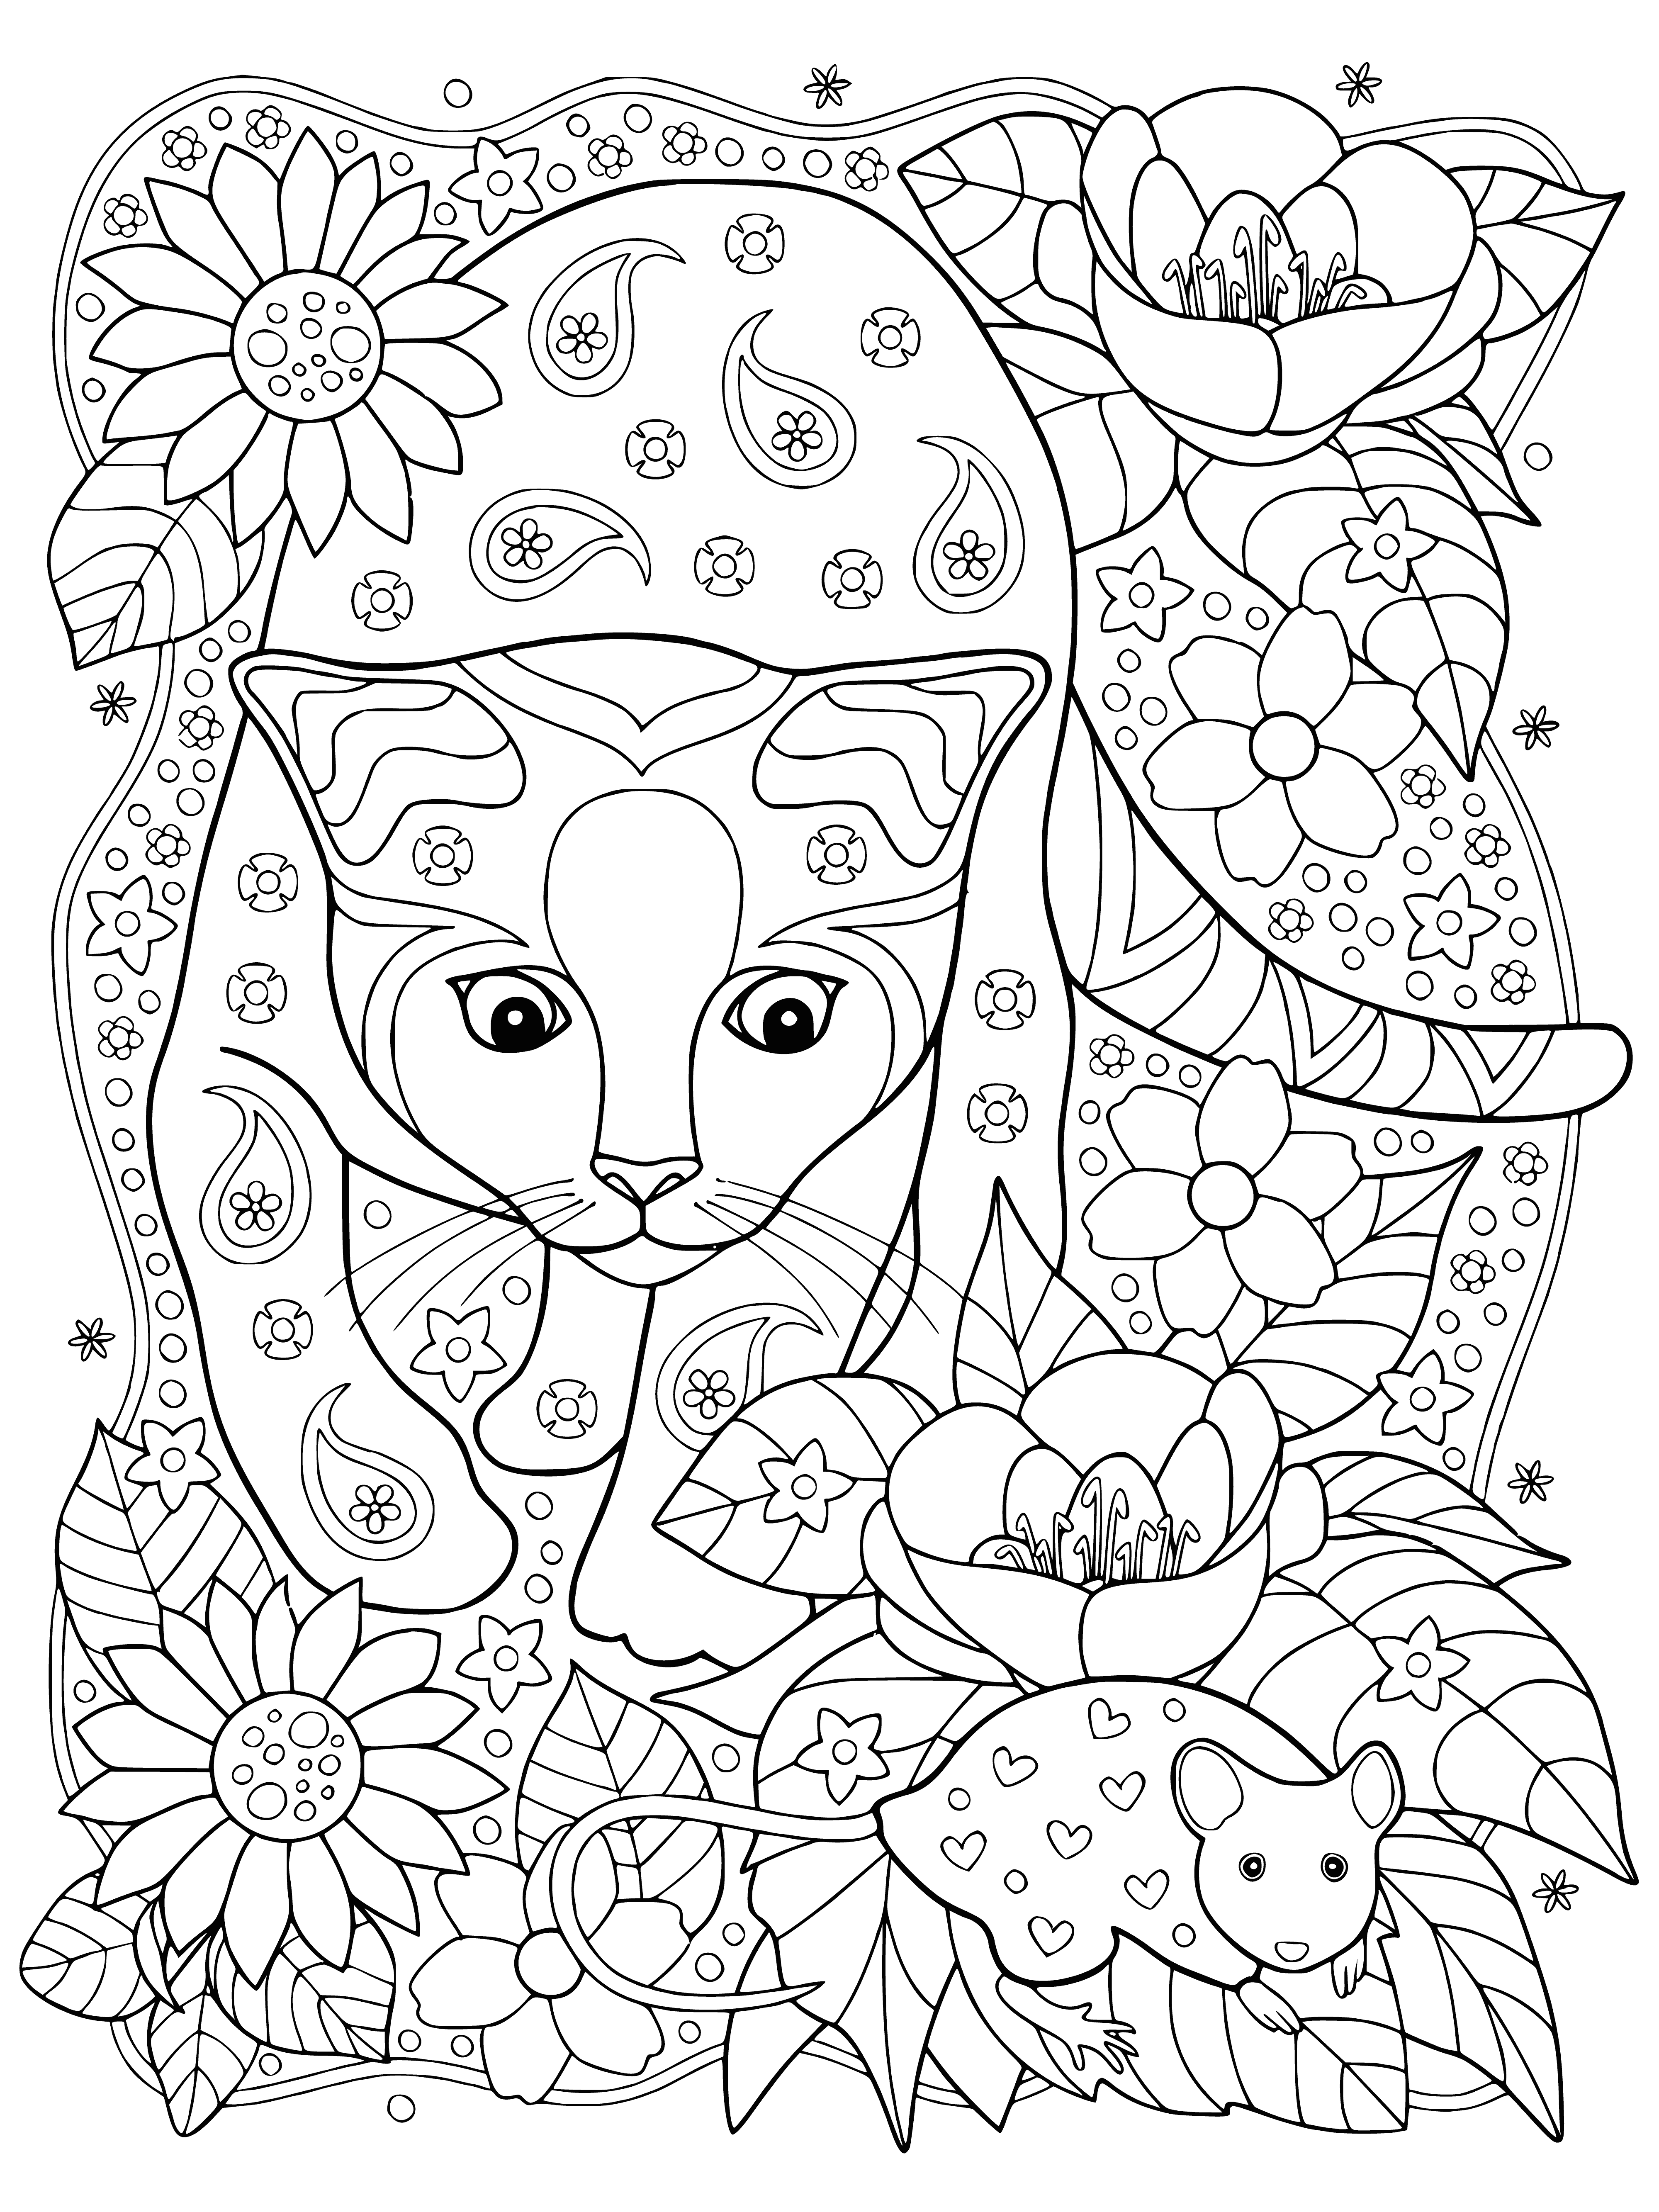 coloring page: Cat stalks mouse, ready to pounce. Eyes fixed, body coiled. Blurry background hinting at its unwavering focus.